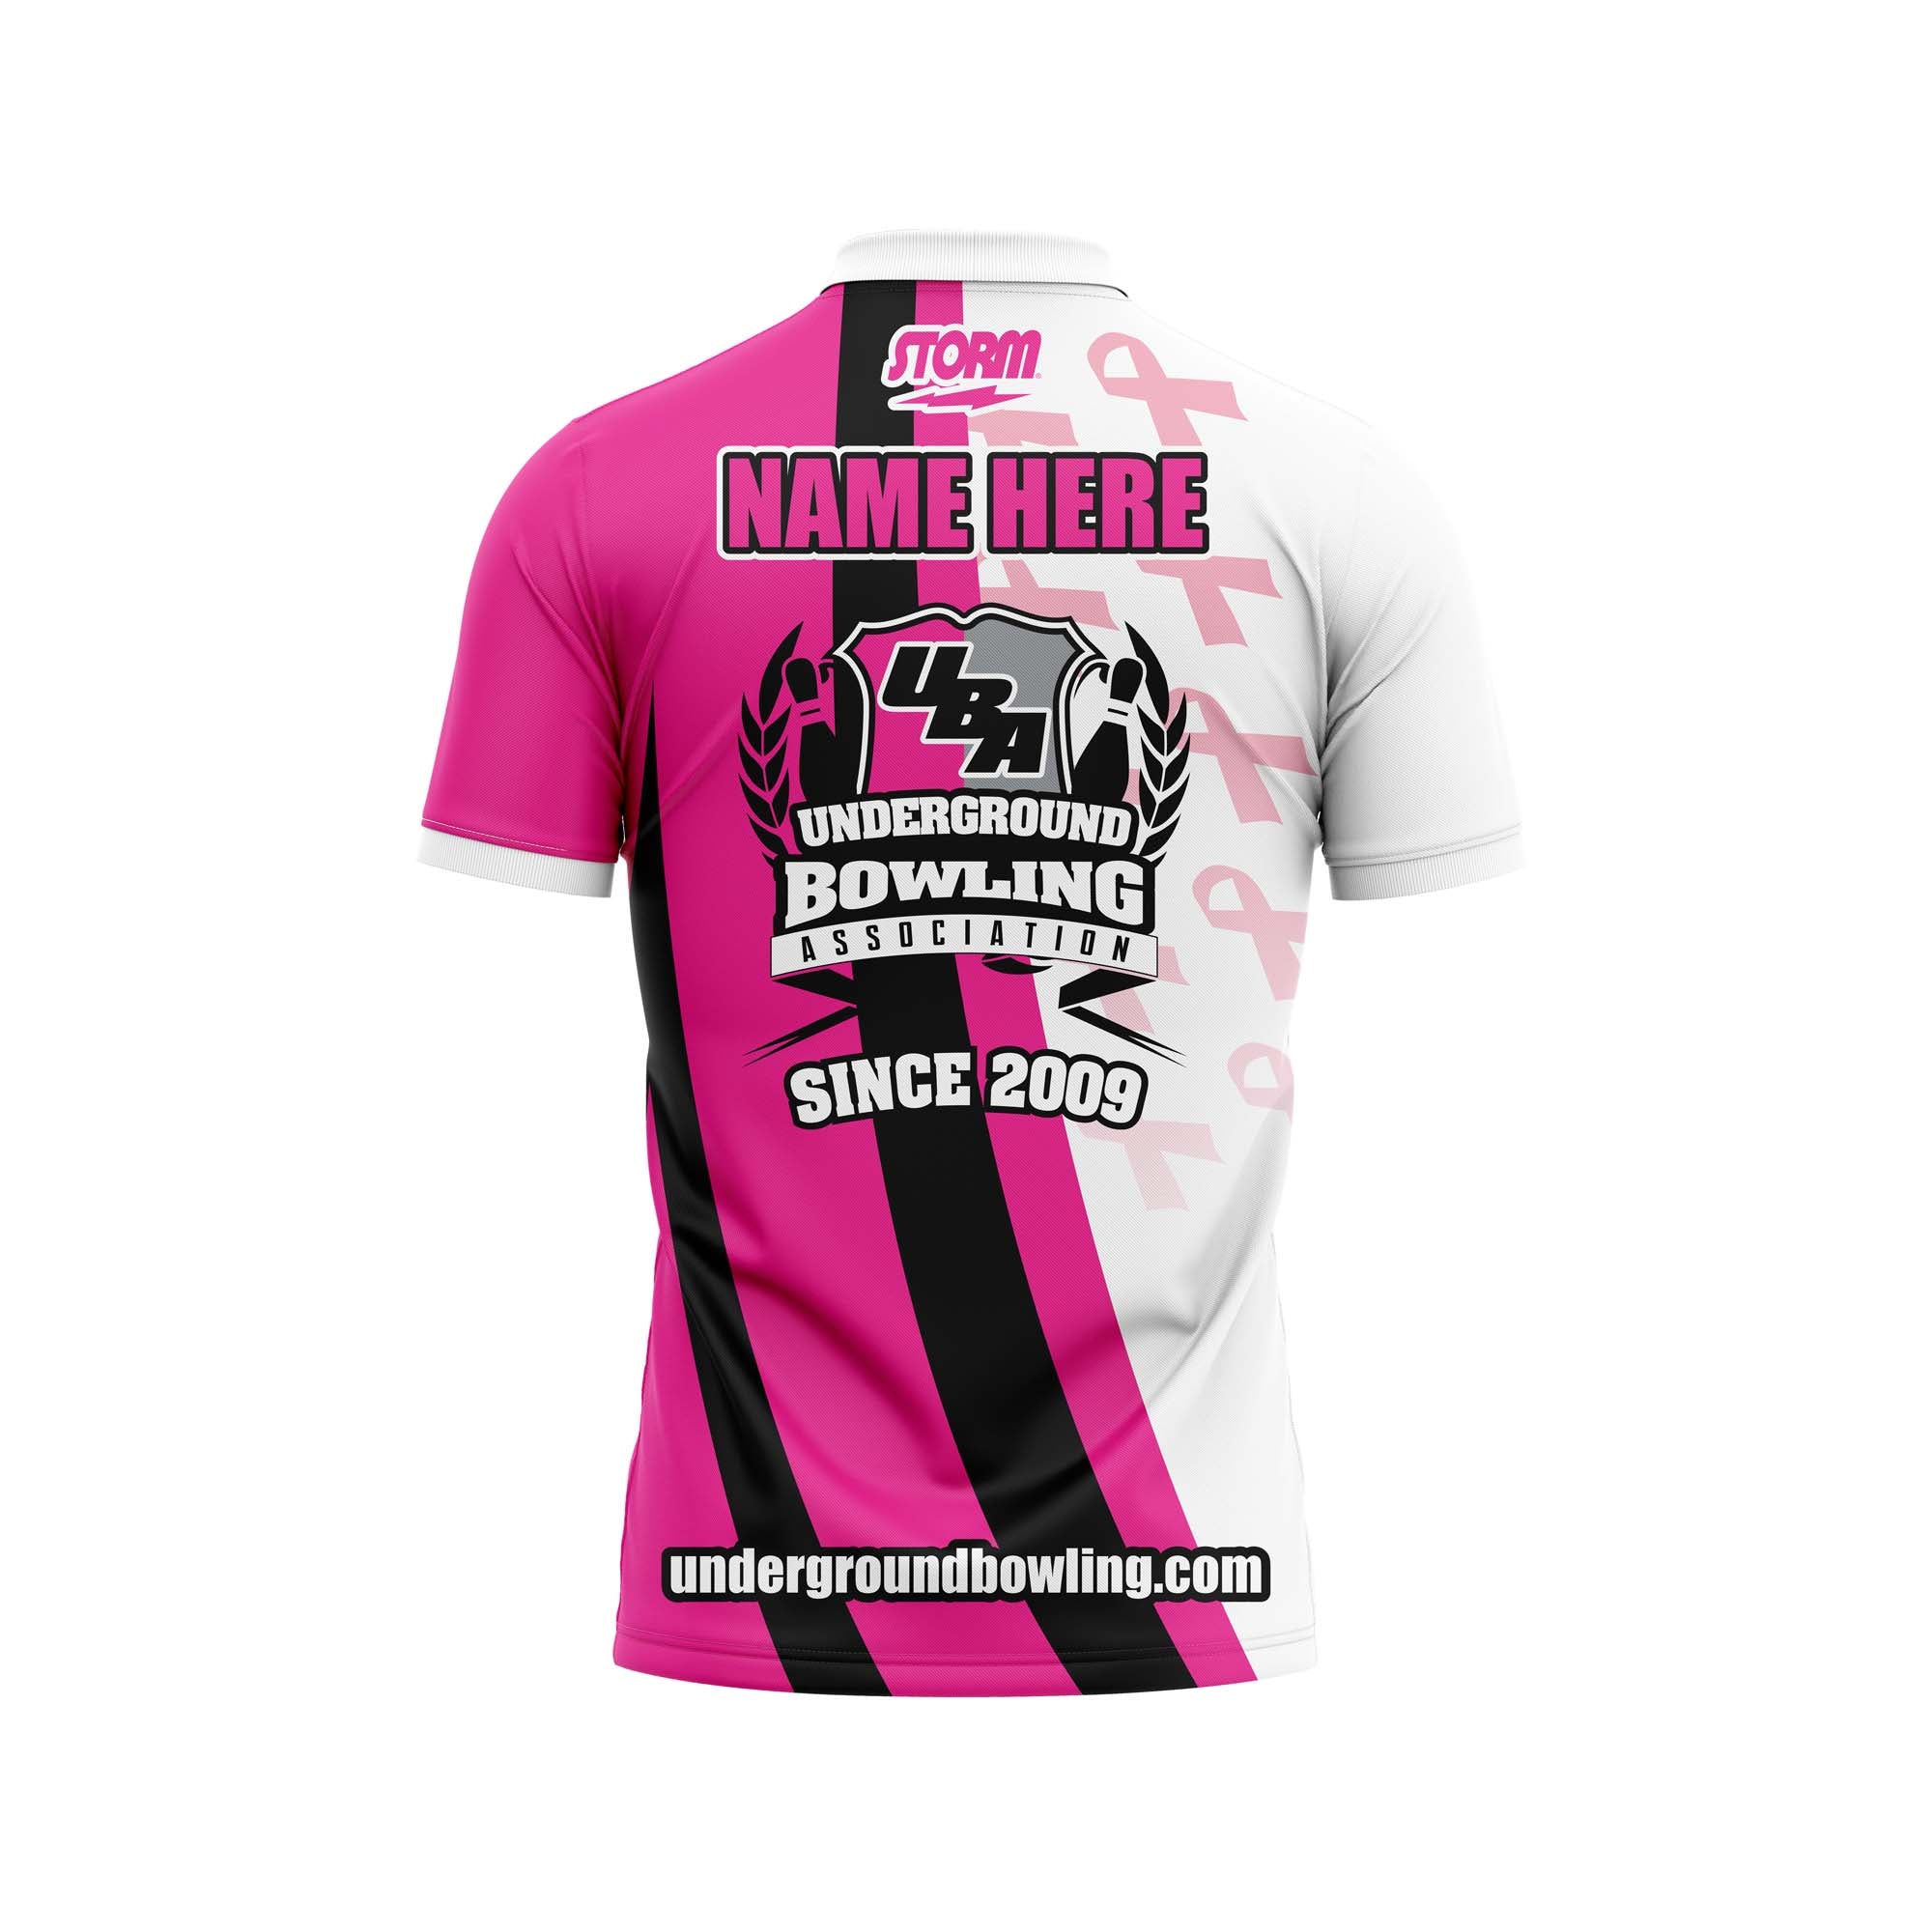 Insurgents Breast Cancer Jersey